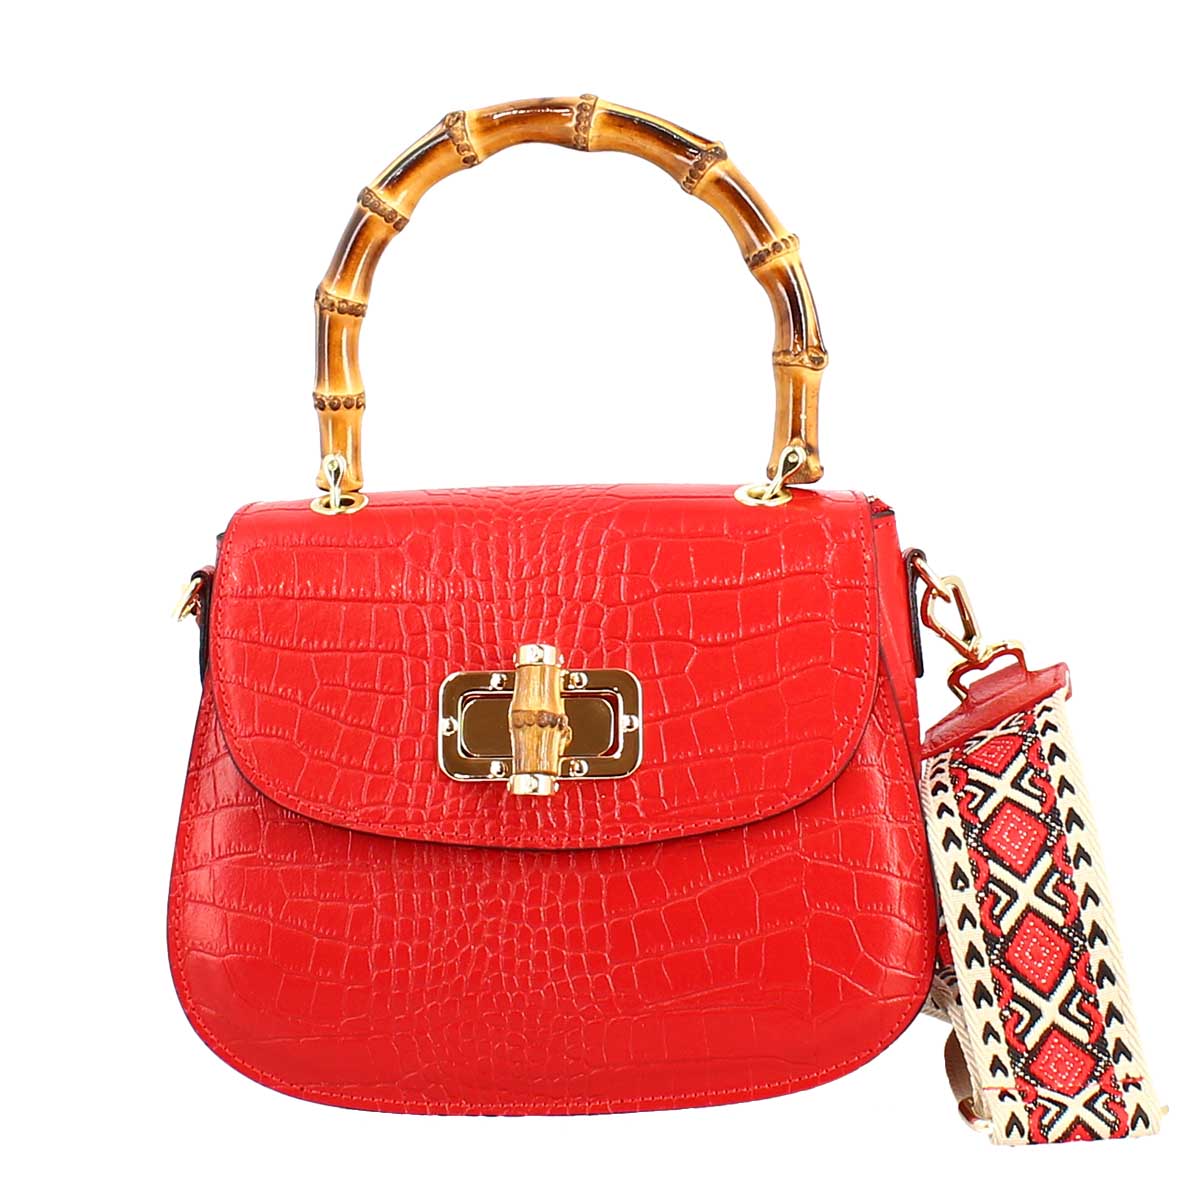 Handmade women's handbag in red leather with removable shoulder strap